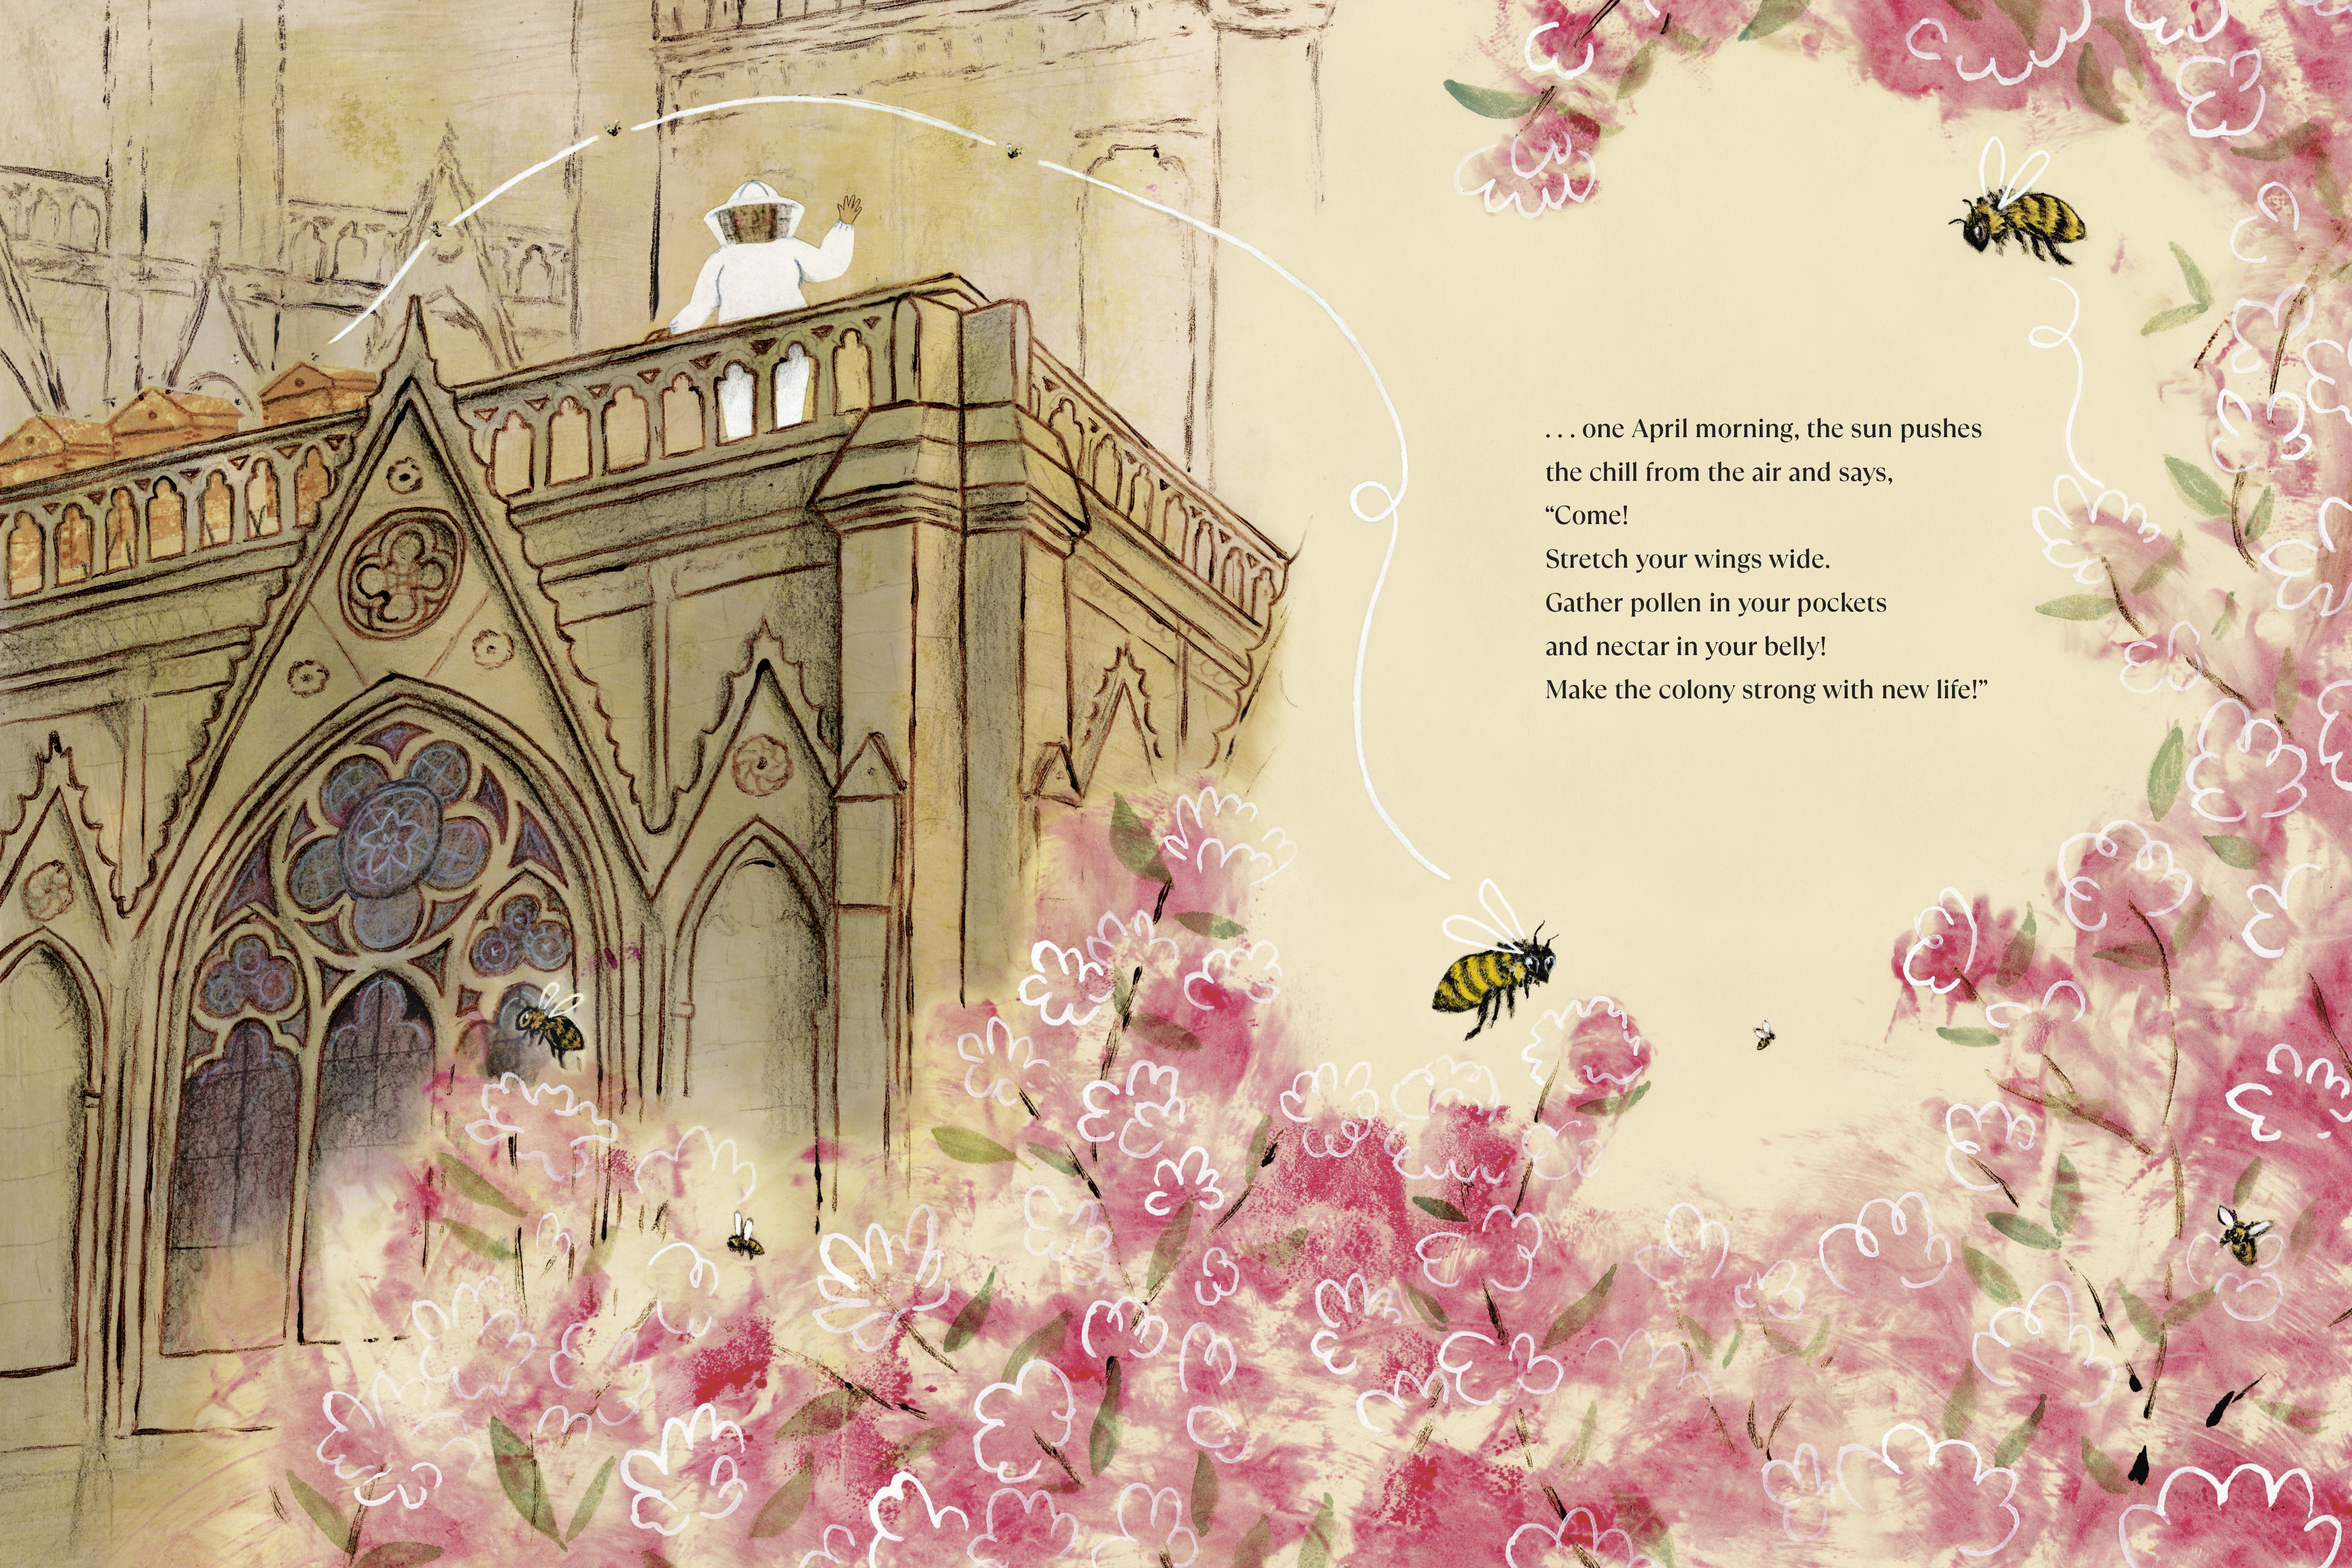 In this interior image from The Bees of Notre Dame, a beekeeper in a protective white suit waves from the roof of Notre Dame, while a few flying bees and pink blossoms frame the text on the righthand page.